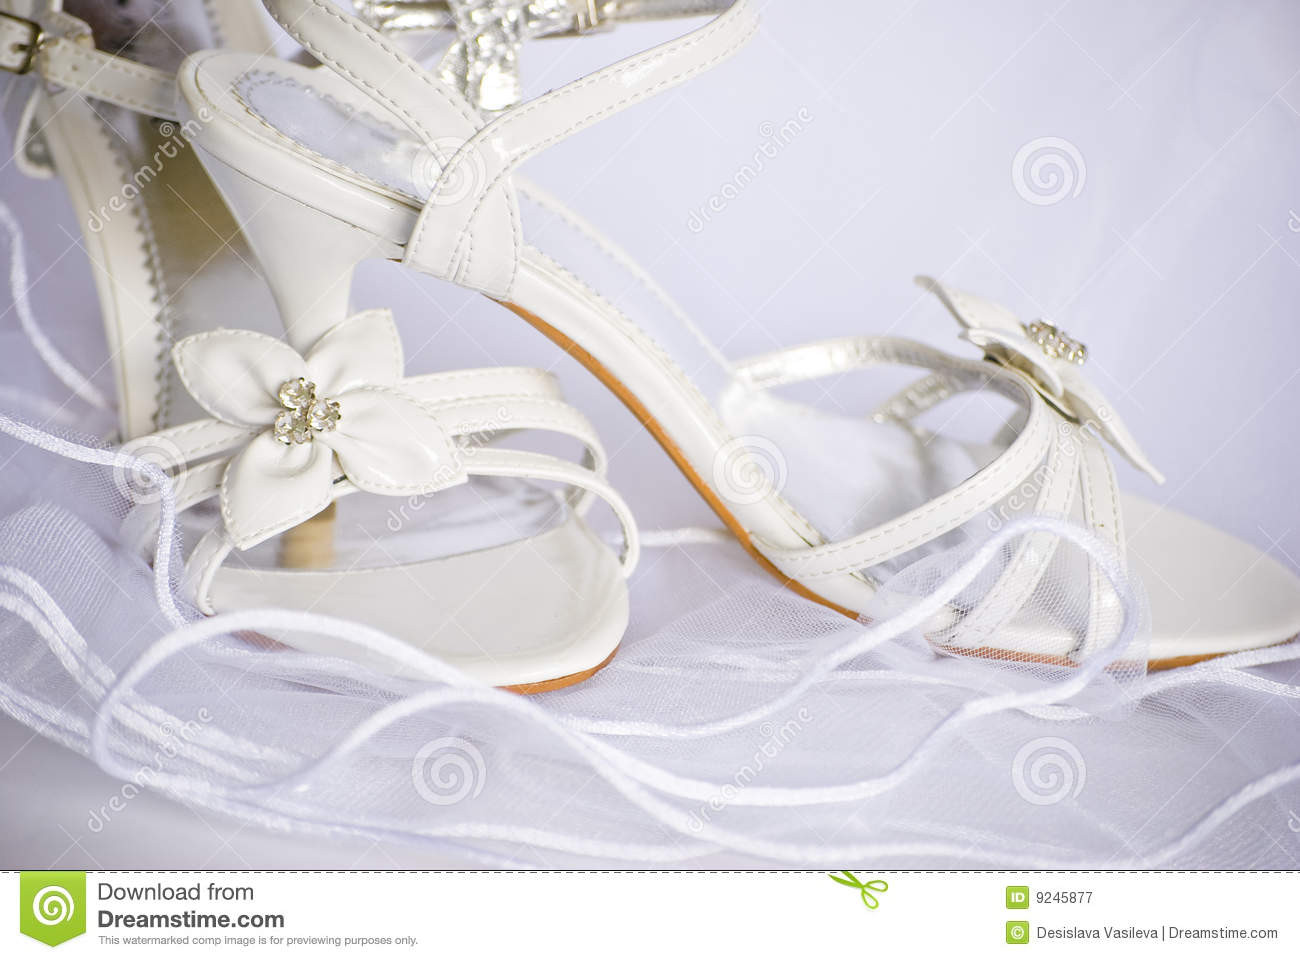 Wedding Shoes And Veils
 Wedding Shoes With Flowers Over Veil Royalty Free Stock